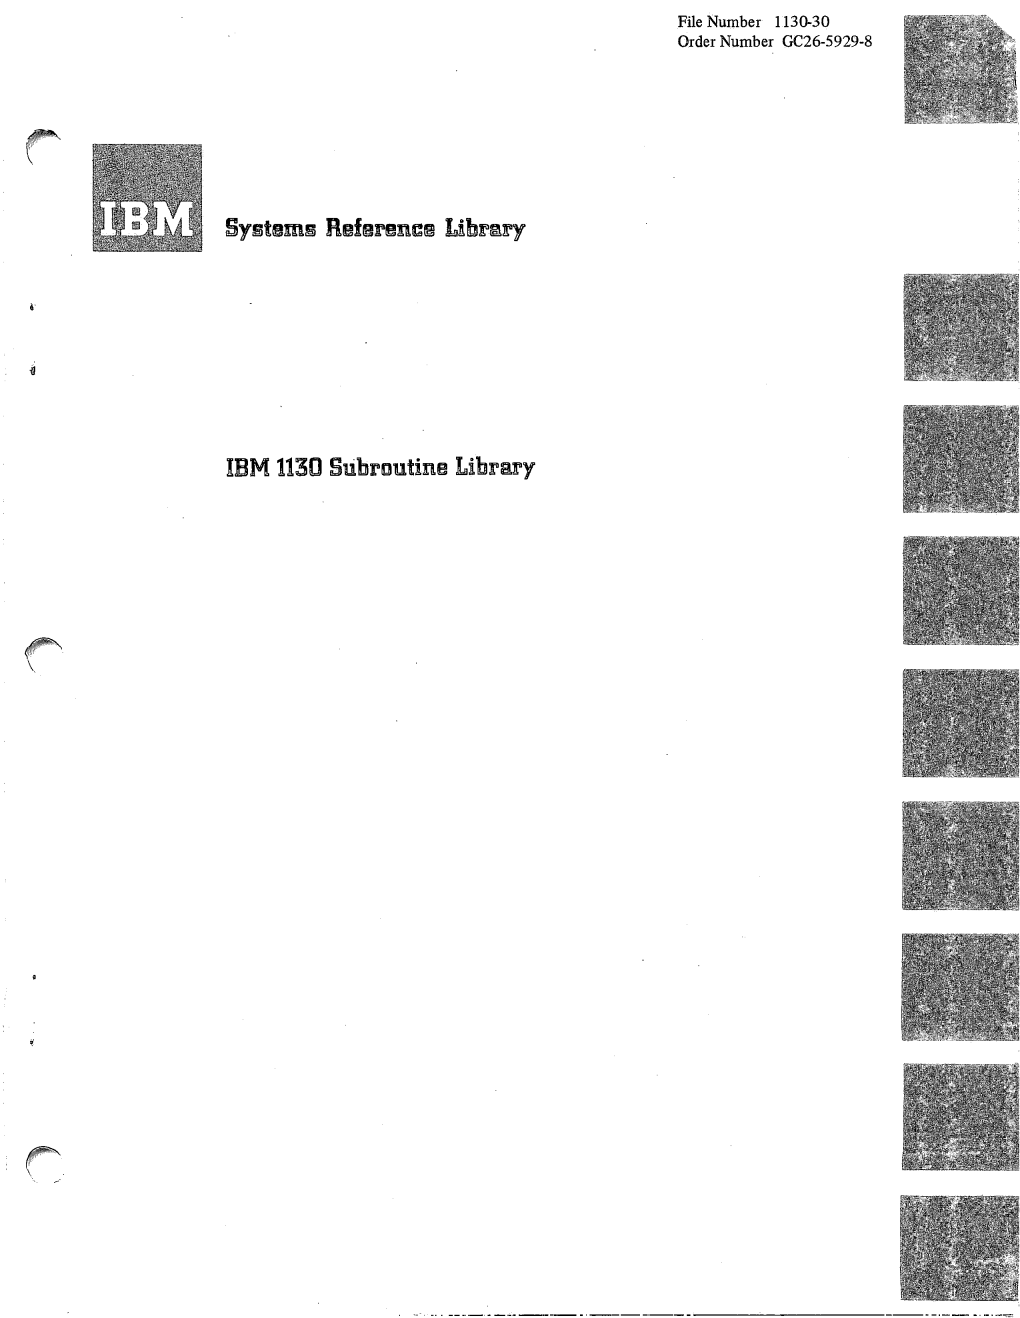 Systems Reference Library IBM 1130 Subroutine Library